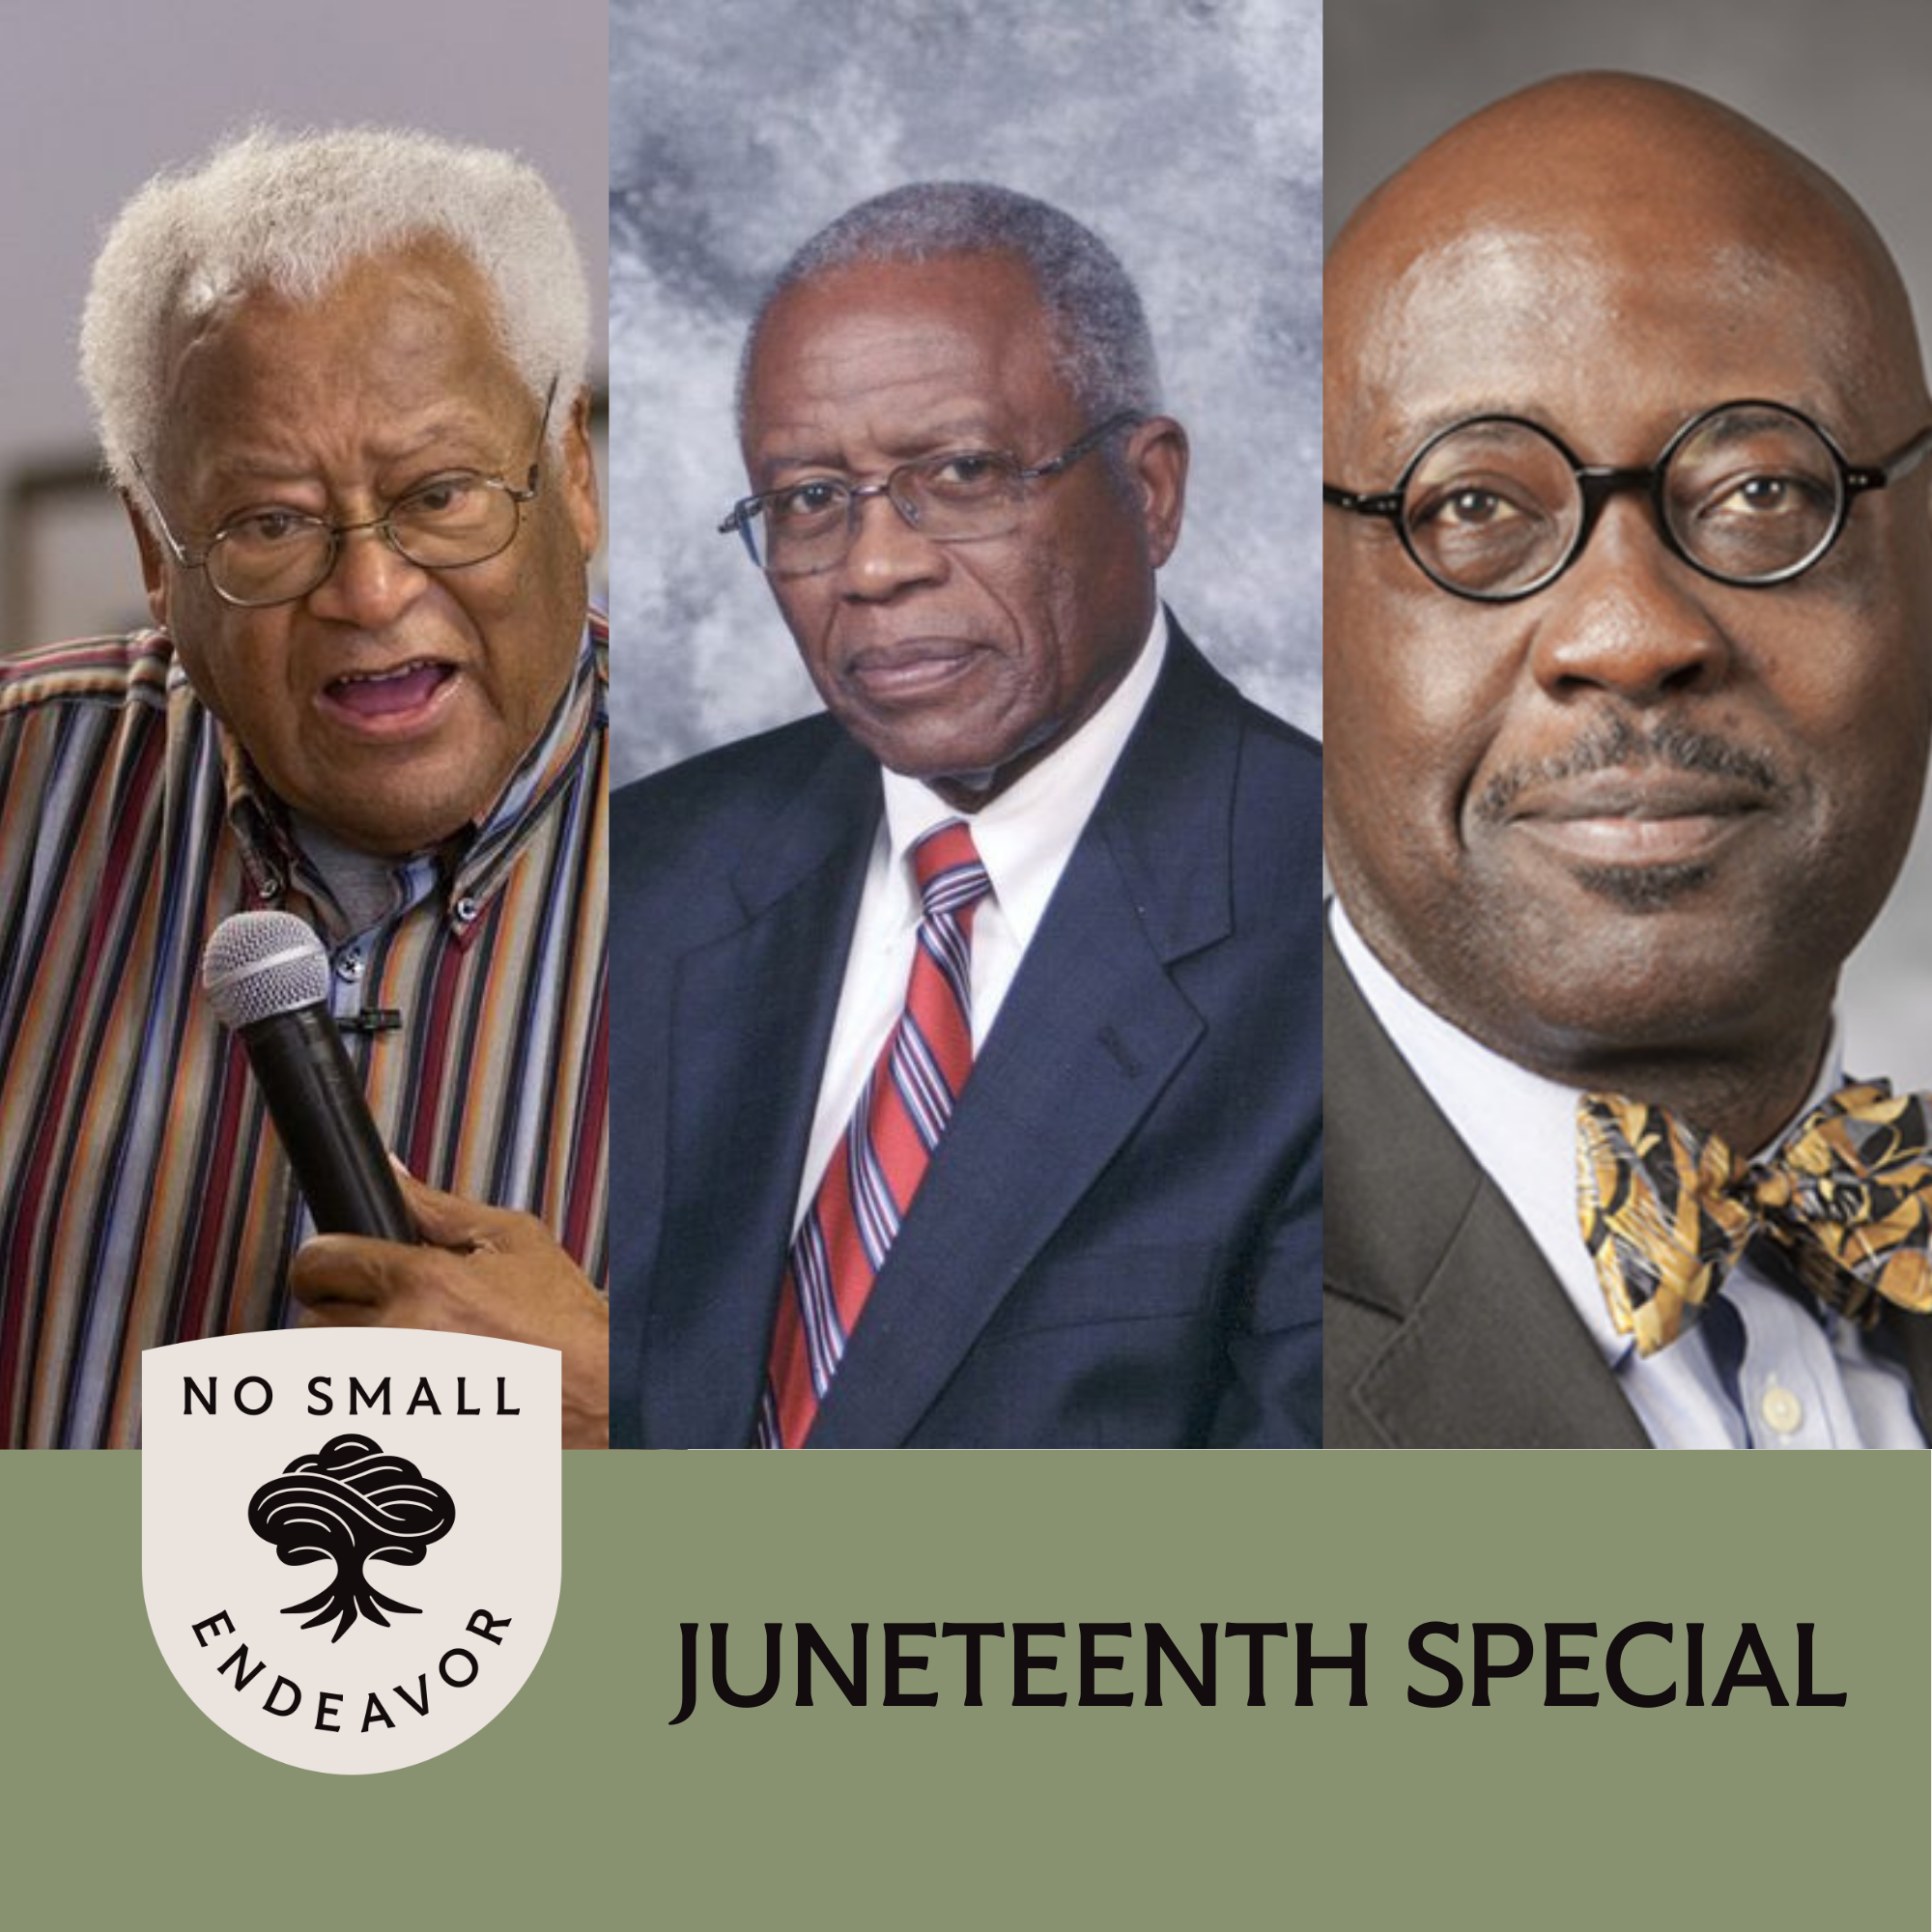 Thumbnail for "160: Juneteenth Special: Fred Gray, James Lawson, and Willie James Jennings".